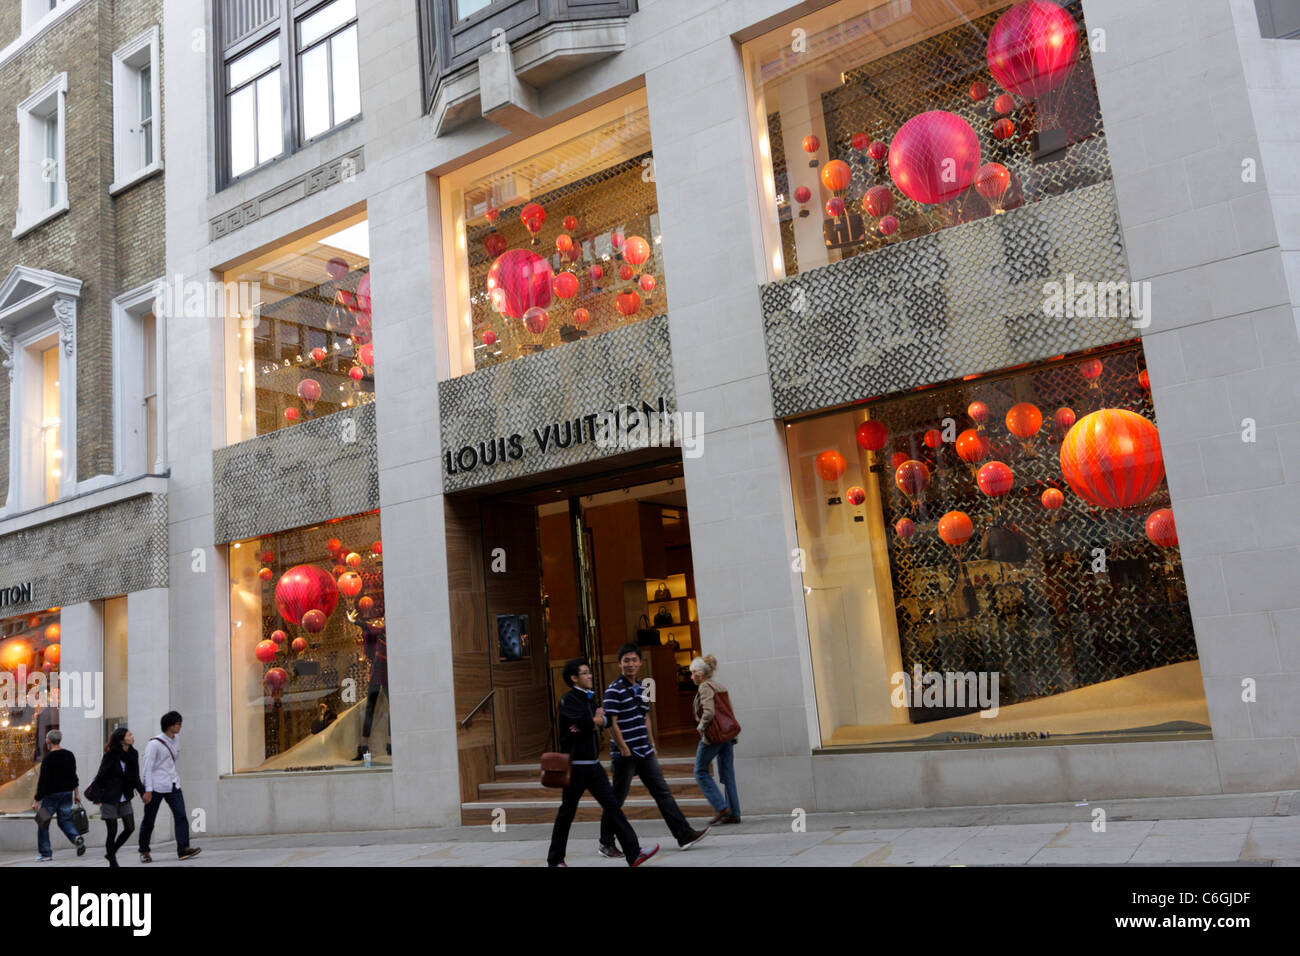 Louis Vuitton shop window display at their flagship store in New Bond Stock Photo: 38474395 - Alamy